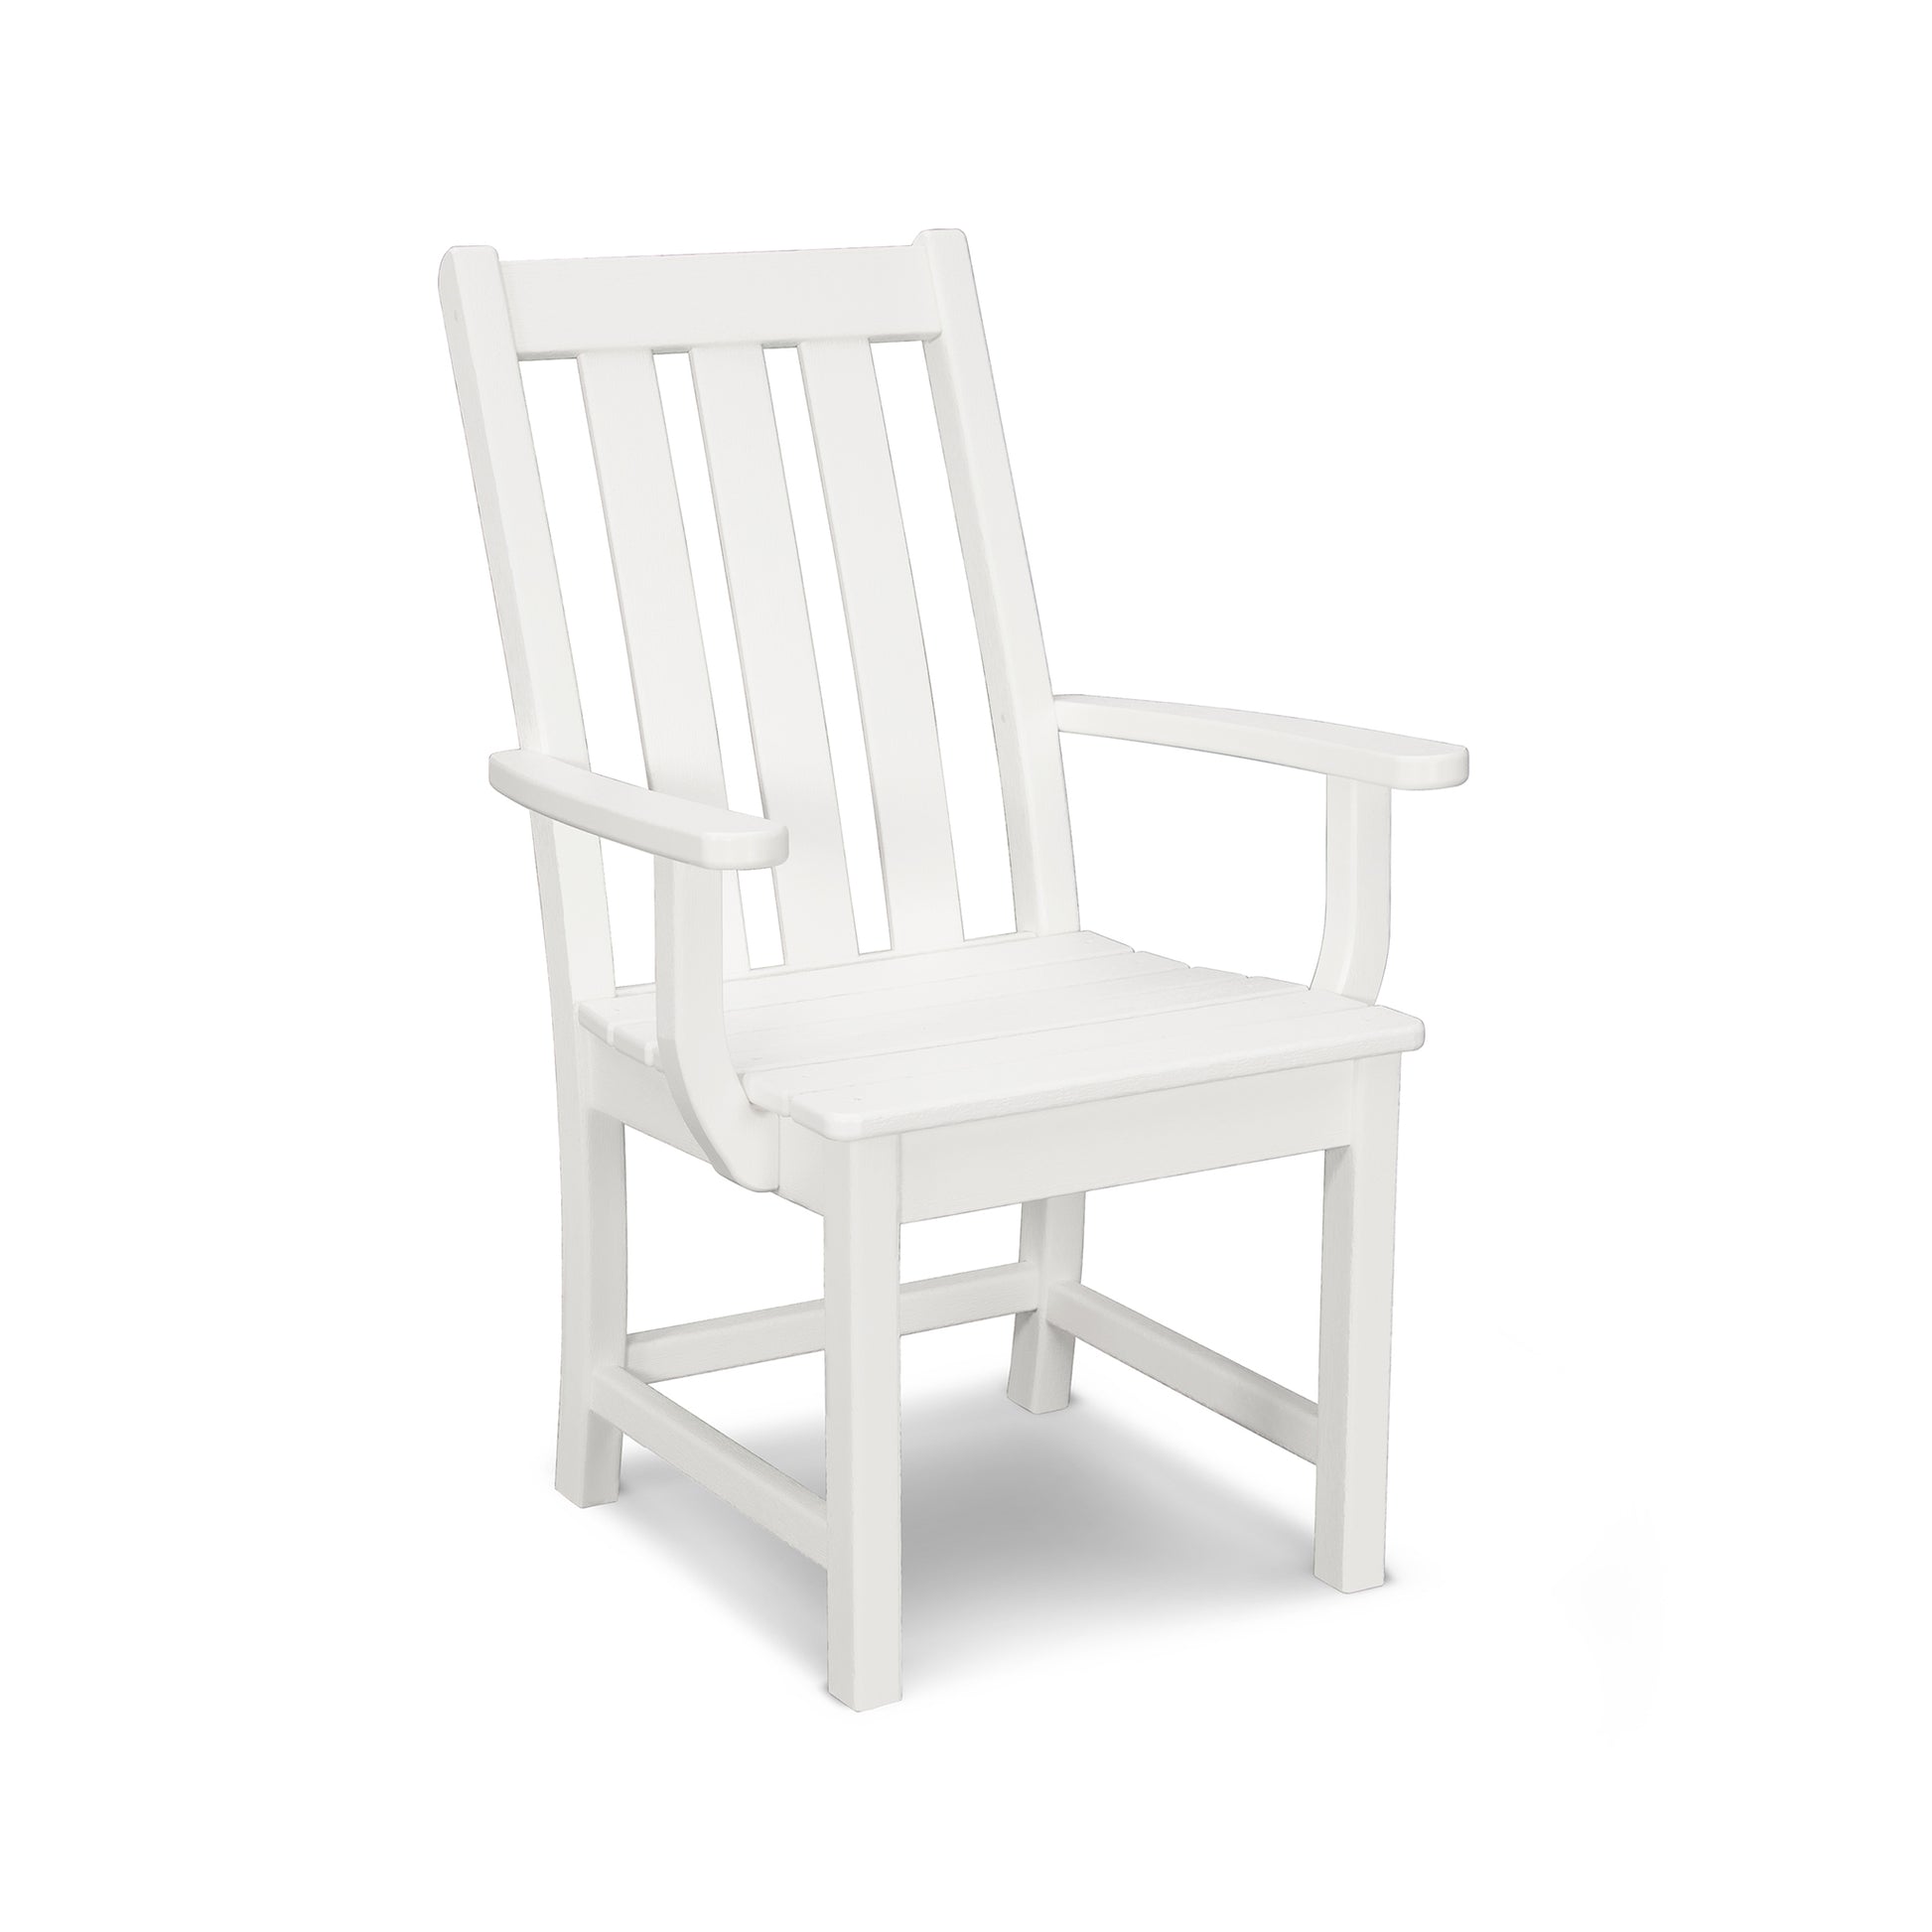 A plain white POLYWOOD® Vineyard Dining Arm Chair with a tall, slatted backrest and armrests, standing on a solid white background.